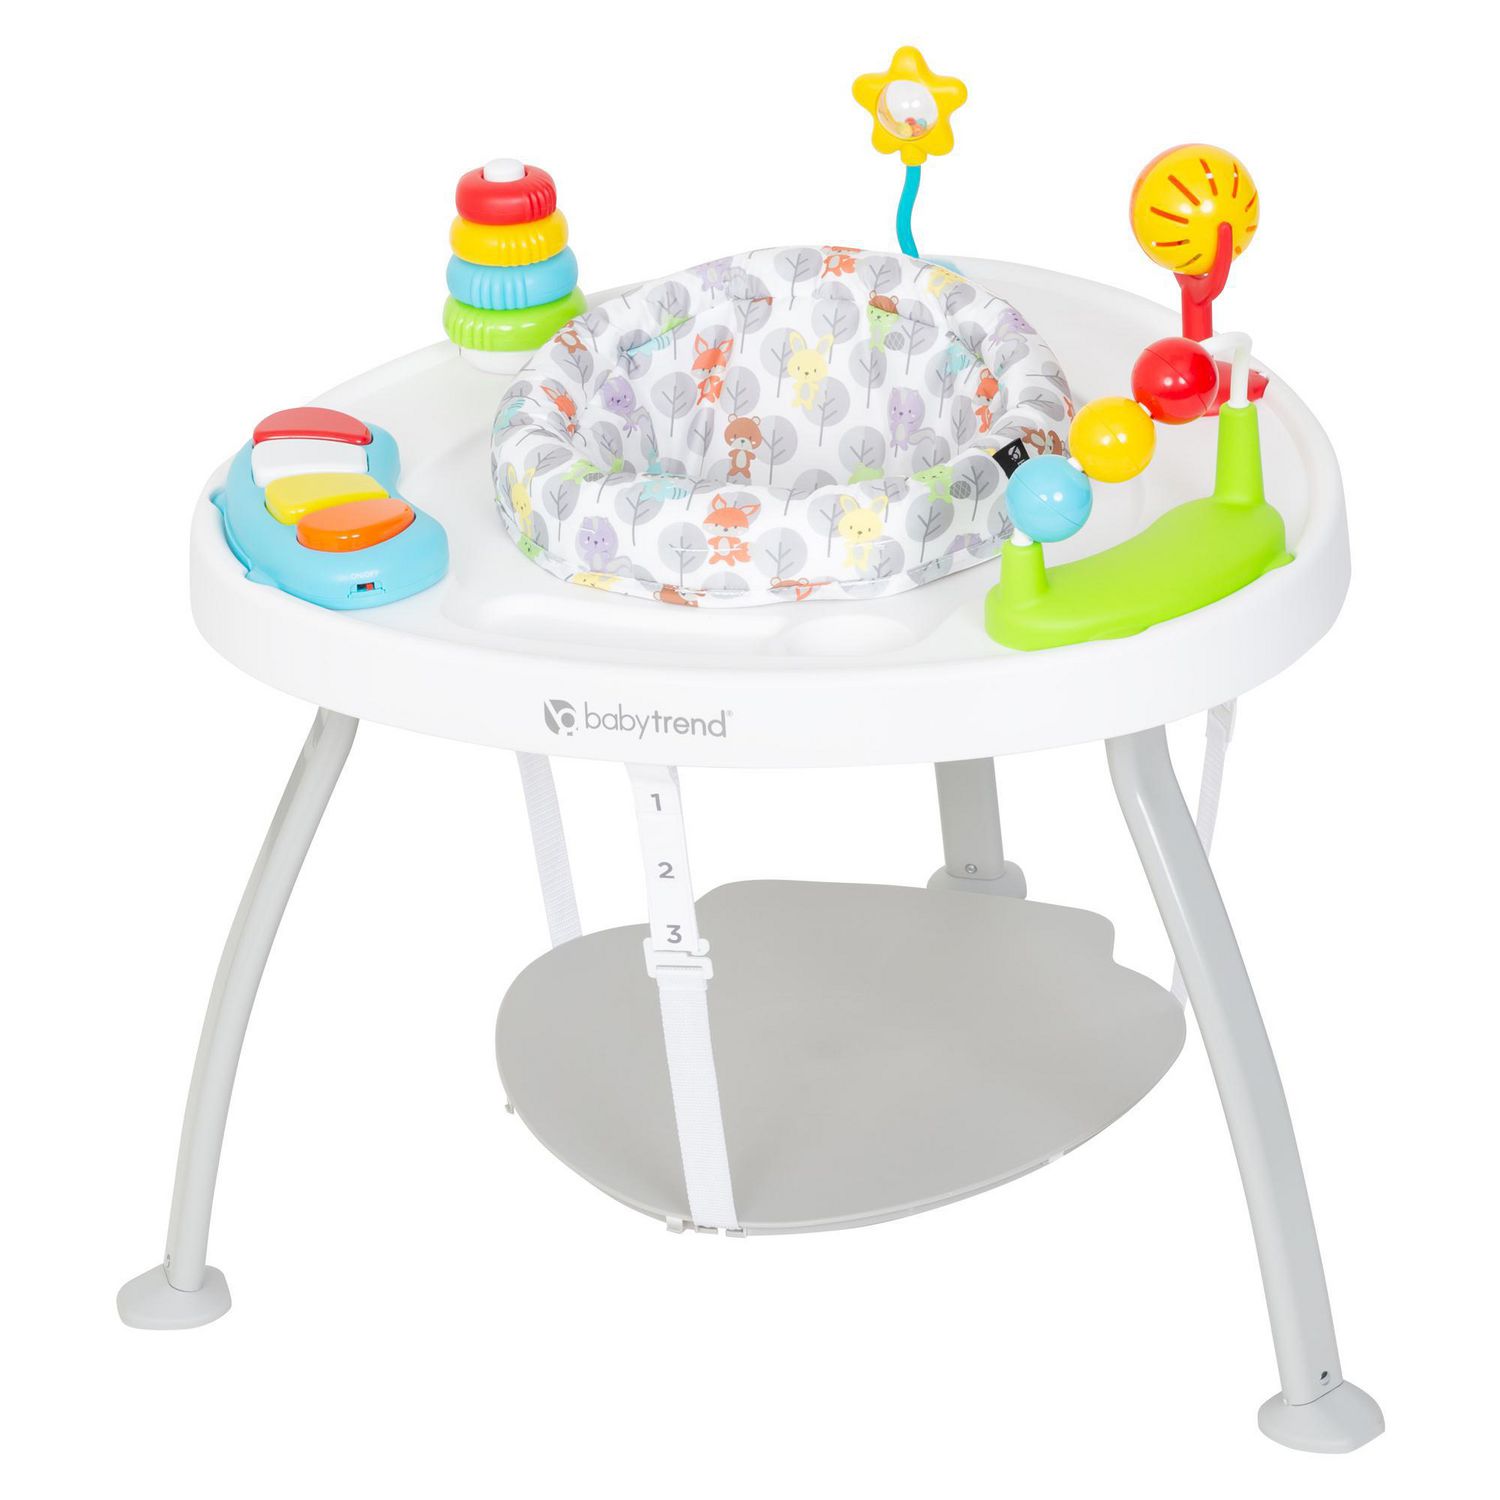 Baby Trend 3-in-1 Bounce'n'Play Activity Center | Walmart Canada